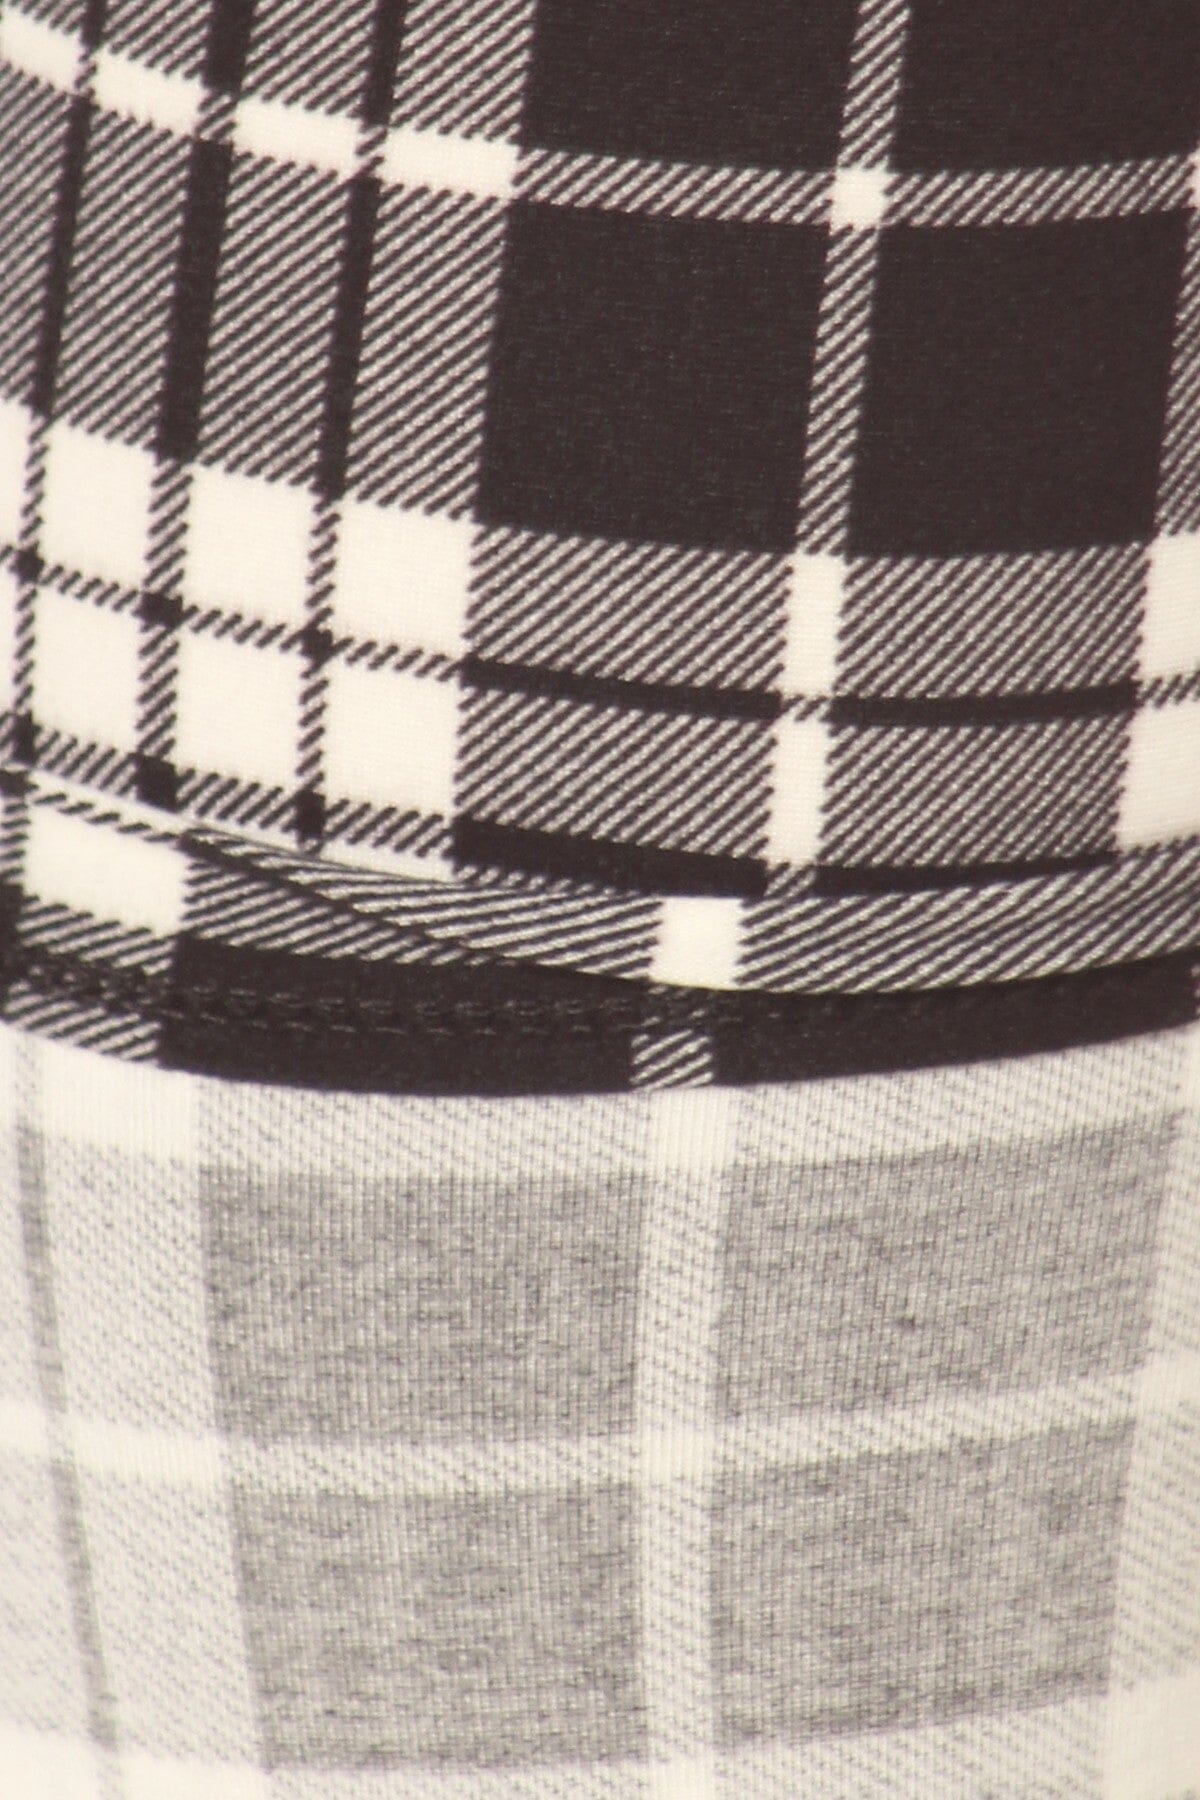 Plaid High Waisted Leggings In A Fitted Style, With An Elastic Waistband Bottoms jehouze 